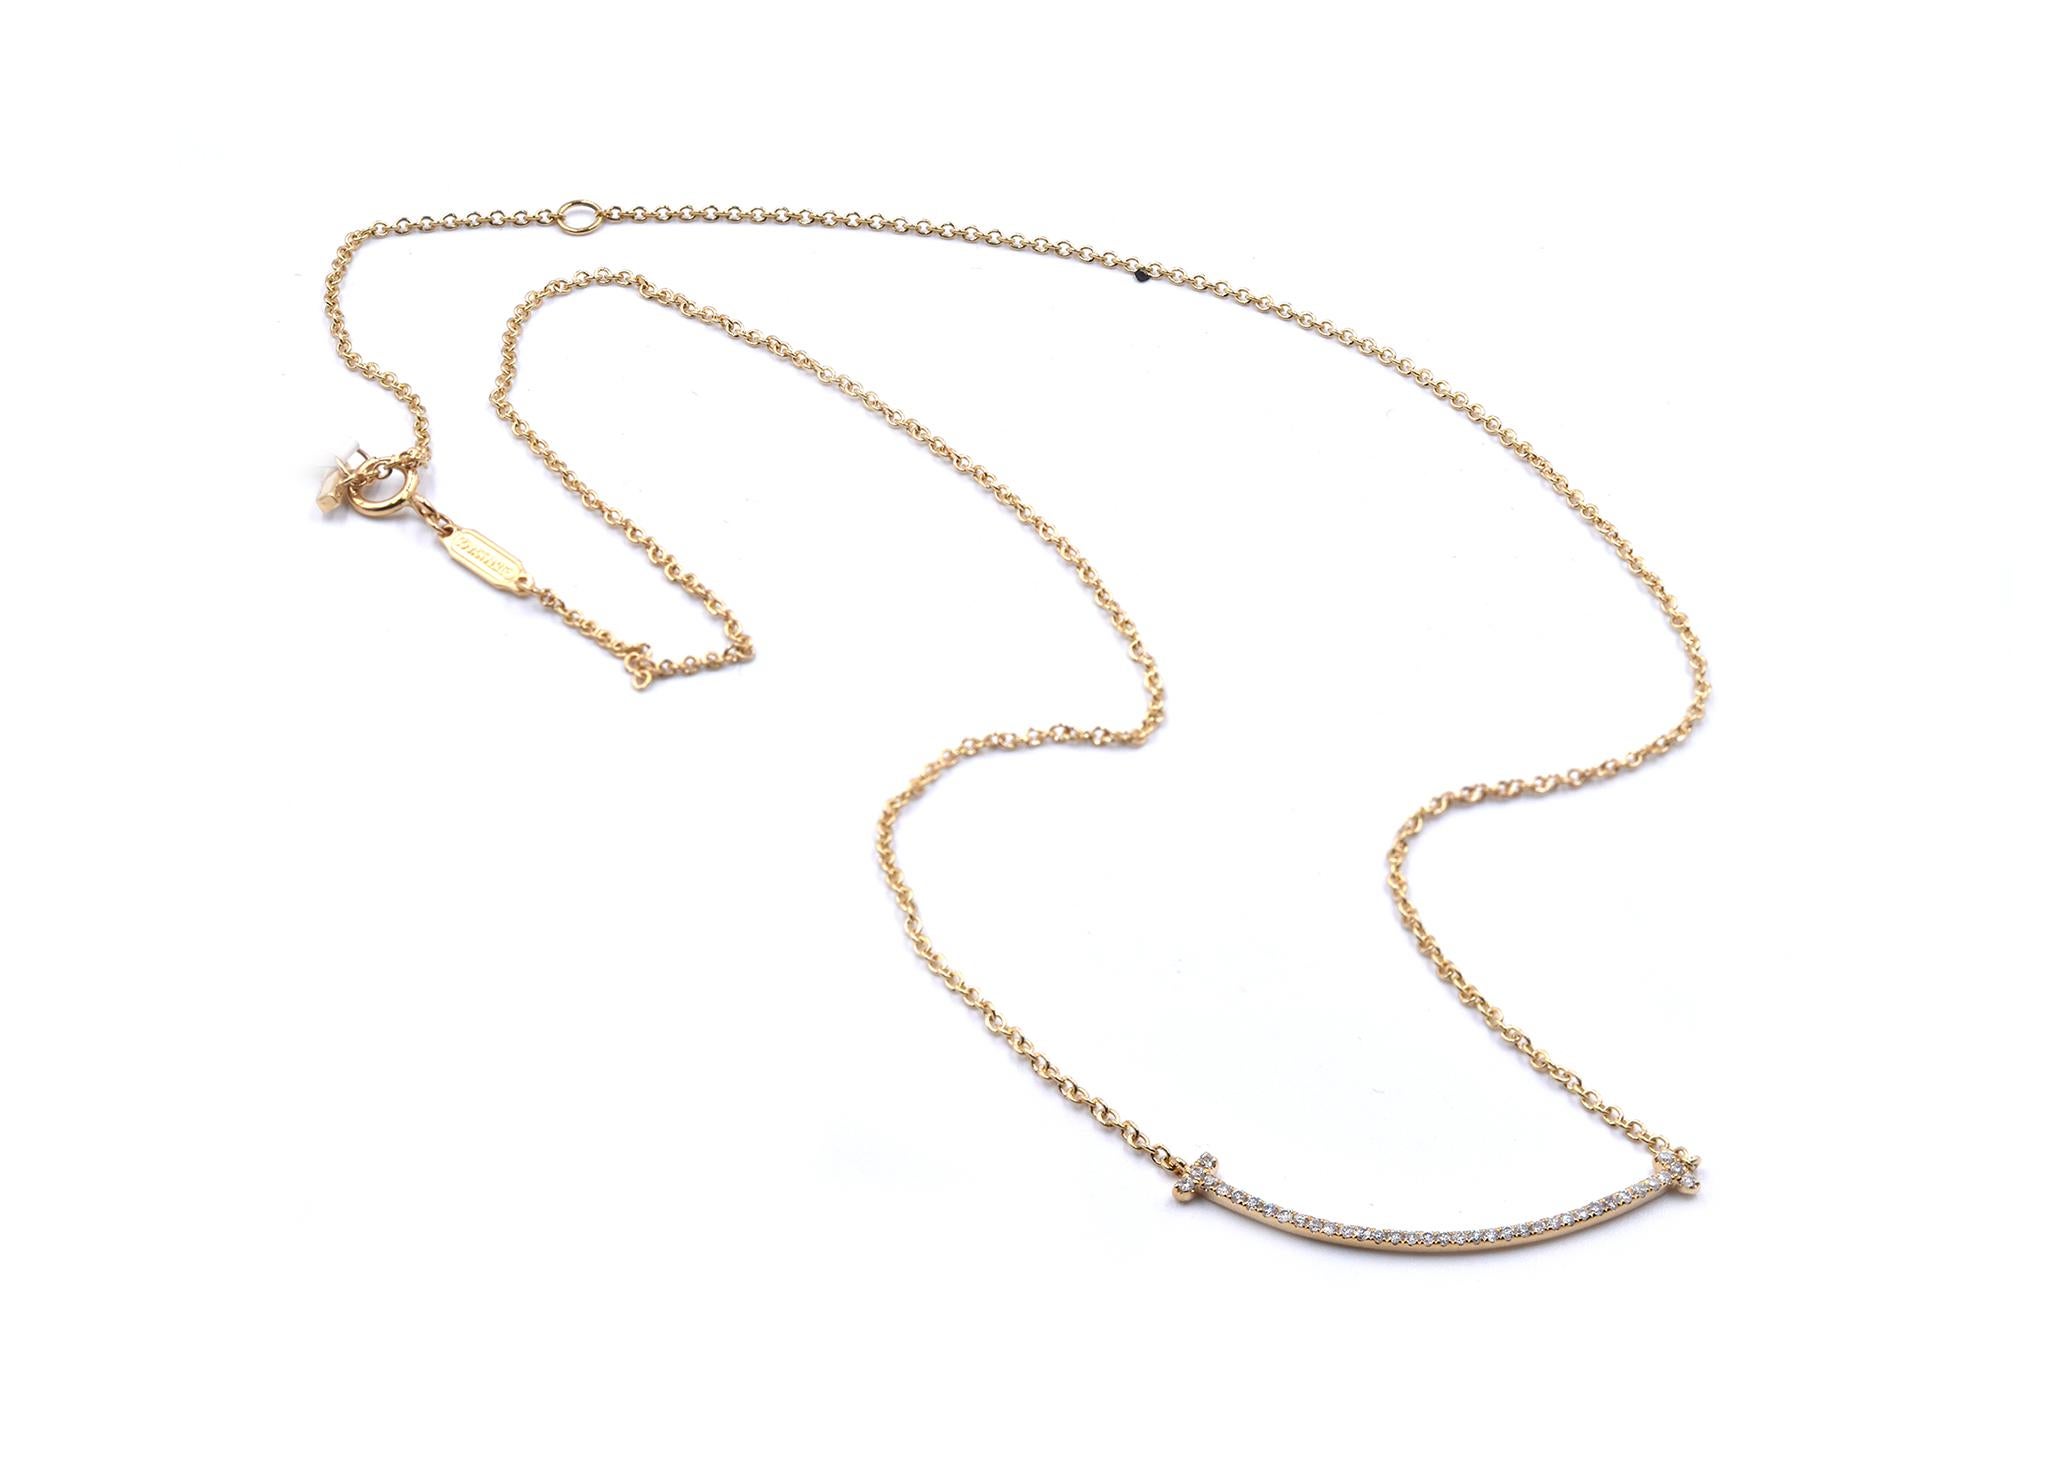 Designer: custom
Material: 18K yellow gold
Diamonds: 38 round brilliant cut = .12cttw
Color: G
Clarity: VS1
Dimensions: necklace measures 18-inches in length 
Weight: 2.62 grams
